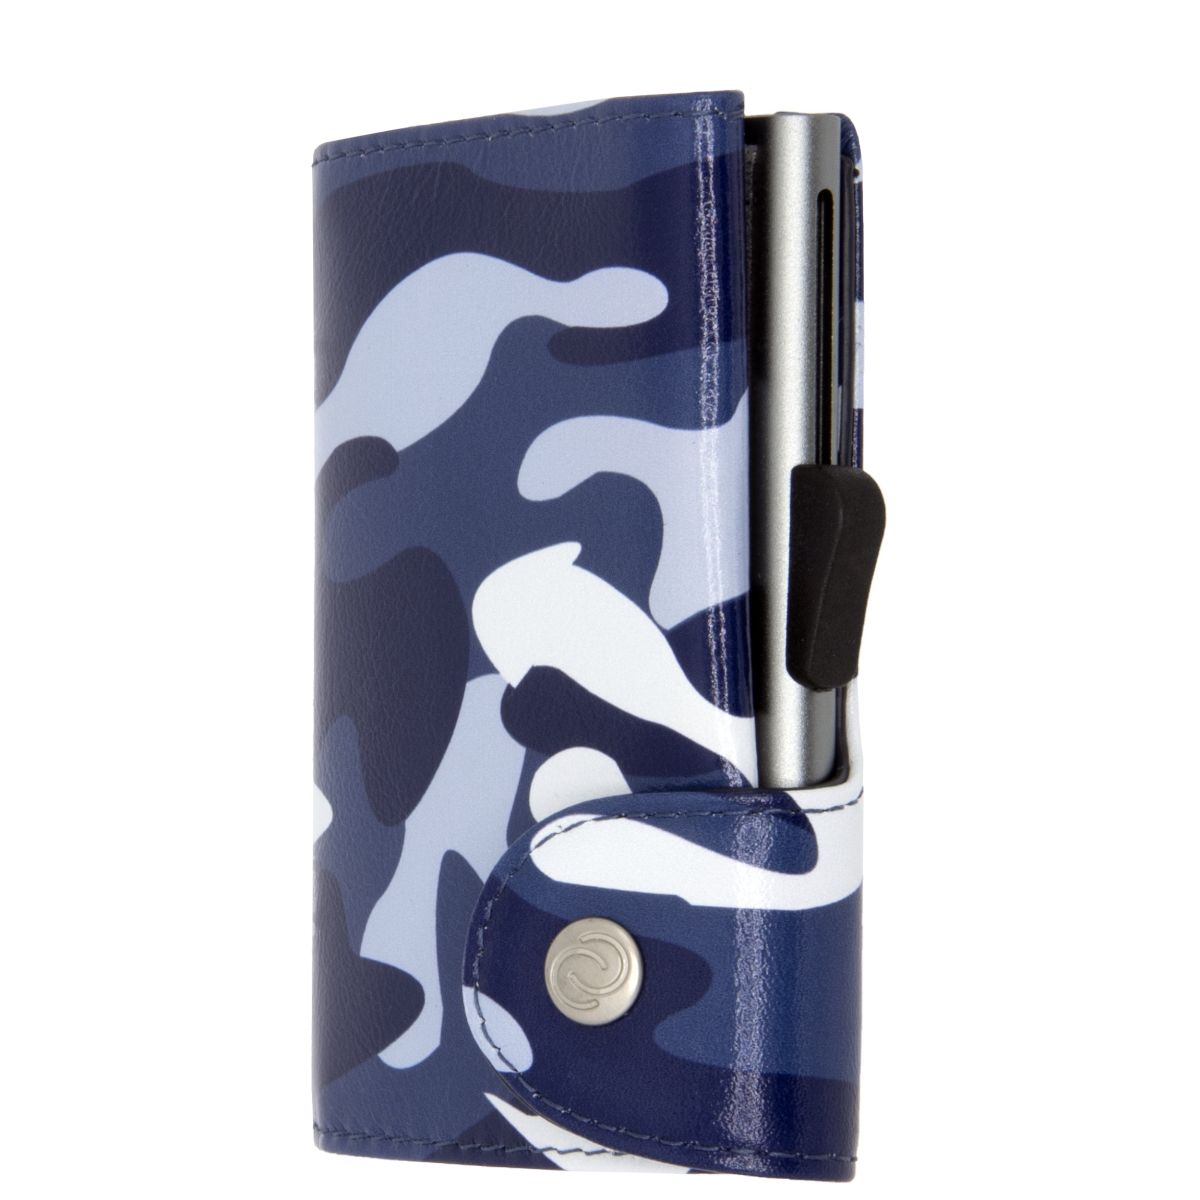 C-Secure Aluminum Card Holder with Genuine Leather - Camo Blue